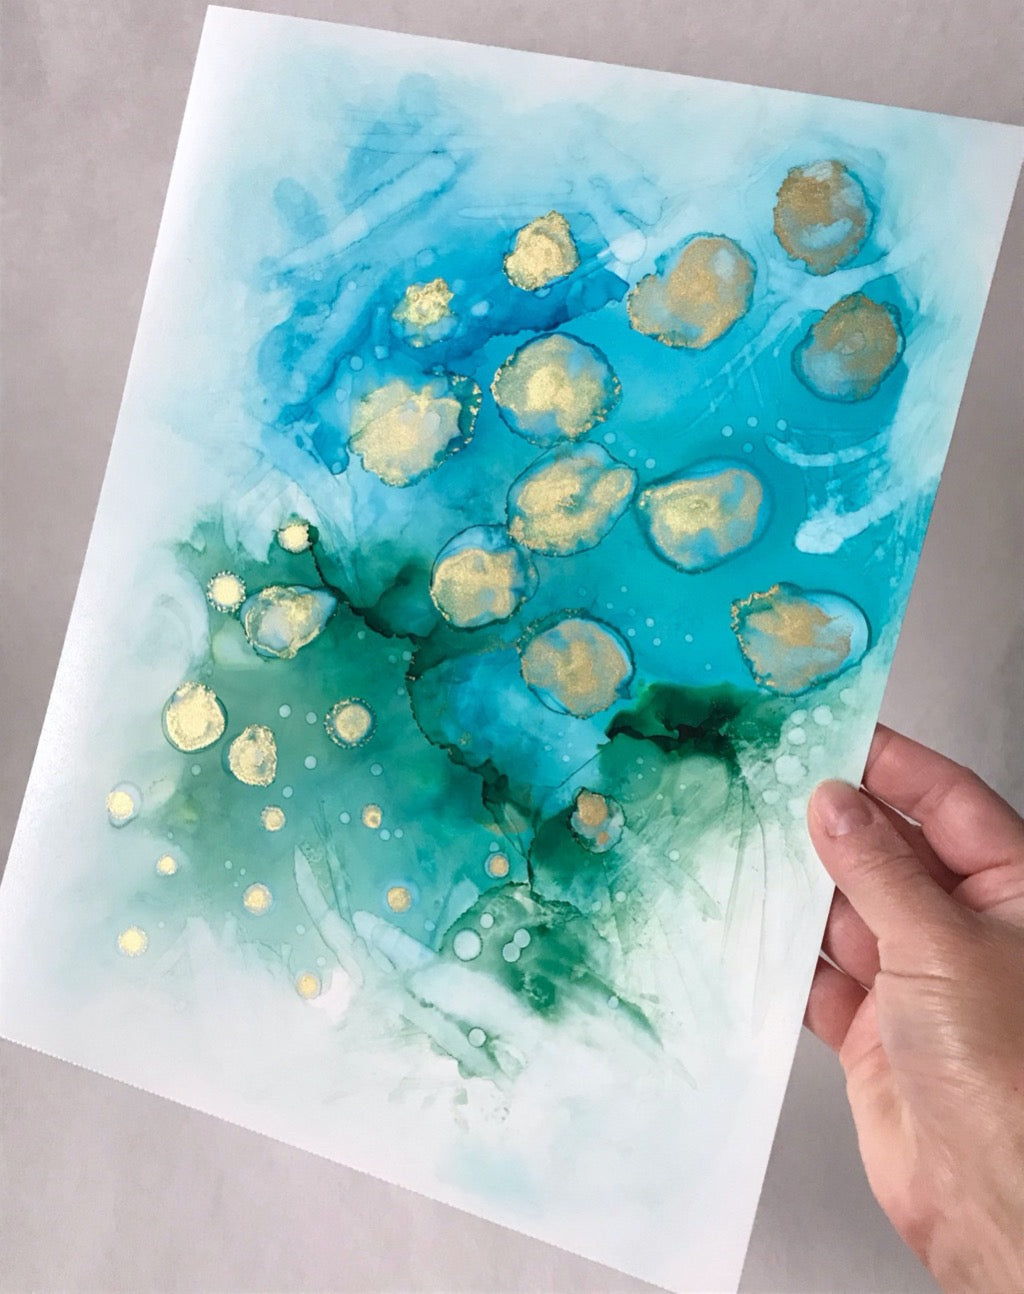 ocean 9"x12" alcohol ink painting by Marianna Mills. Blue, green and gold color inks.